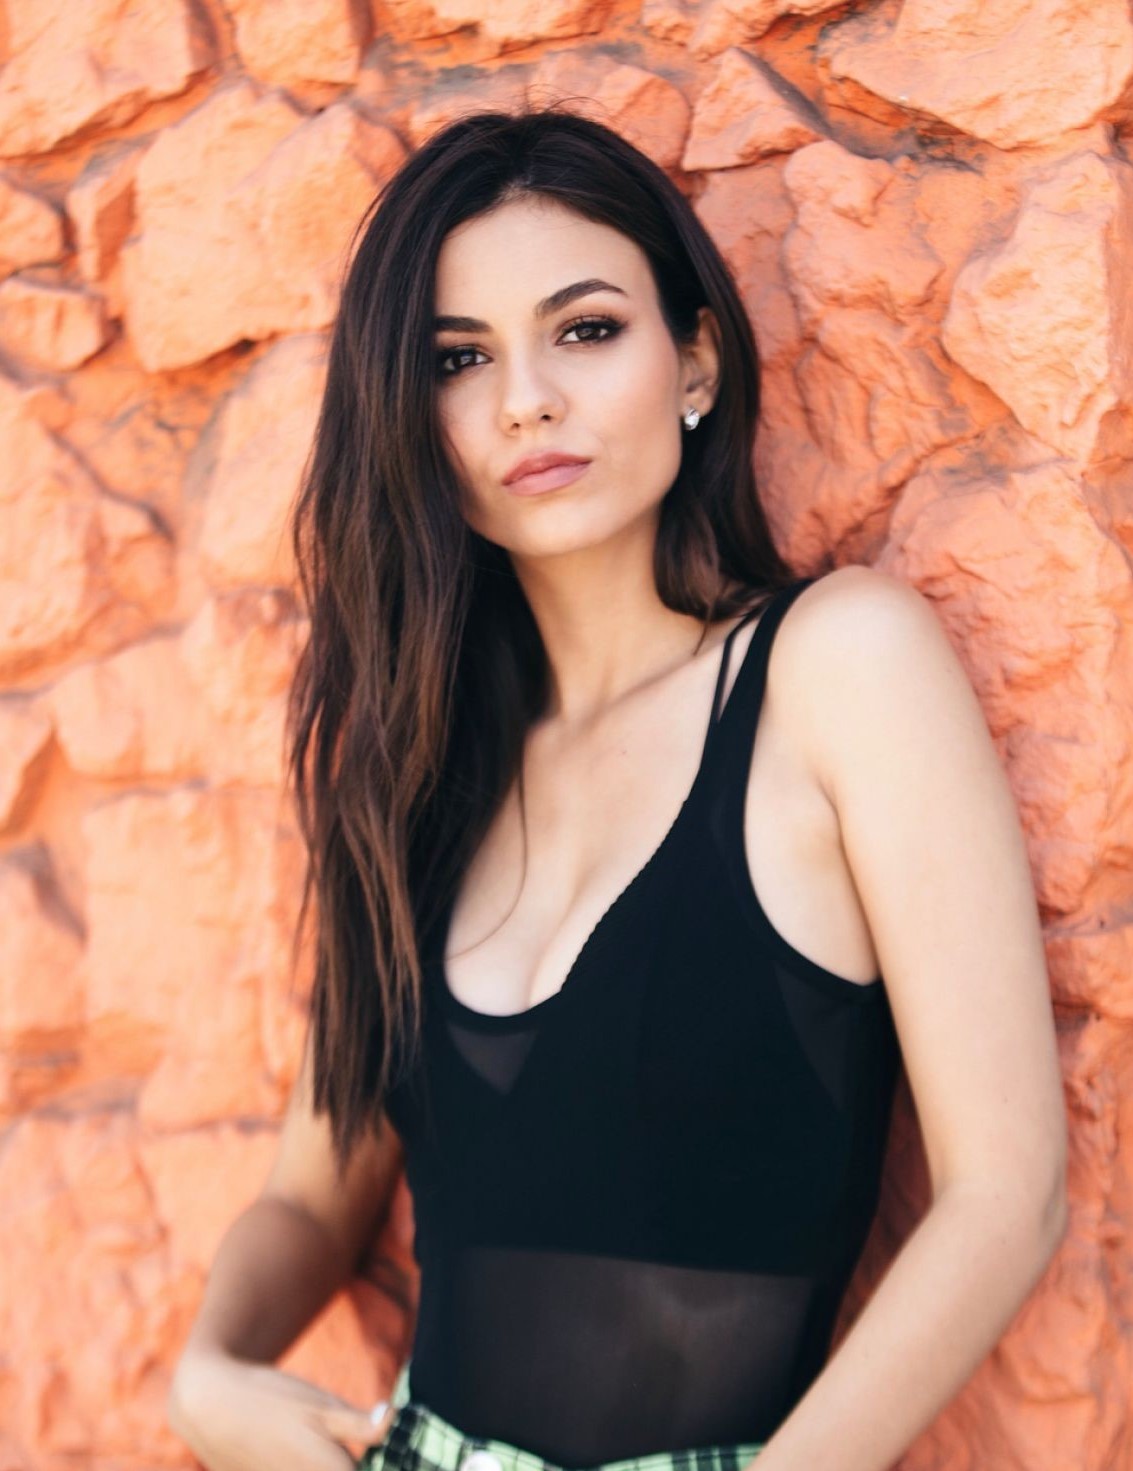 Victoria Justice shows off her thin pins as she films her newest